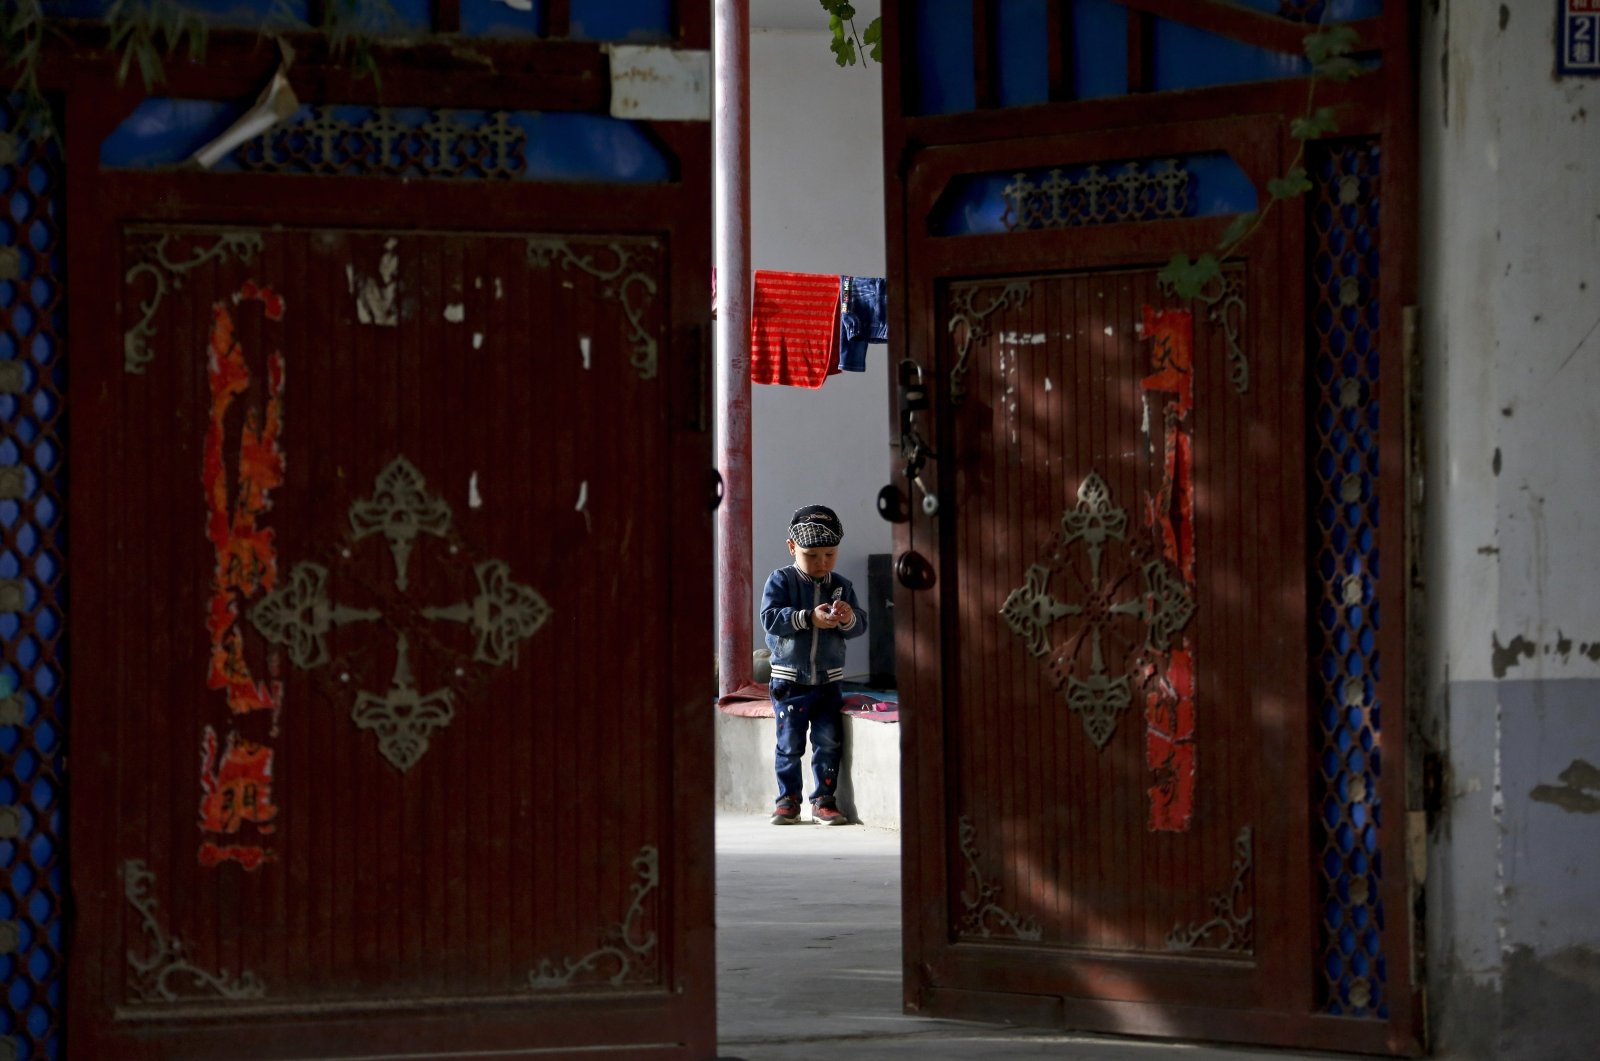 An Uighur child plays alone in the courtyard of a home at the Unity New Village in Hotan, in western China's Xinjiang region, Sept. 20, 2018. (AP Photo)